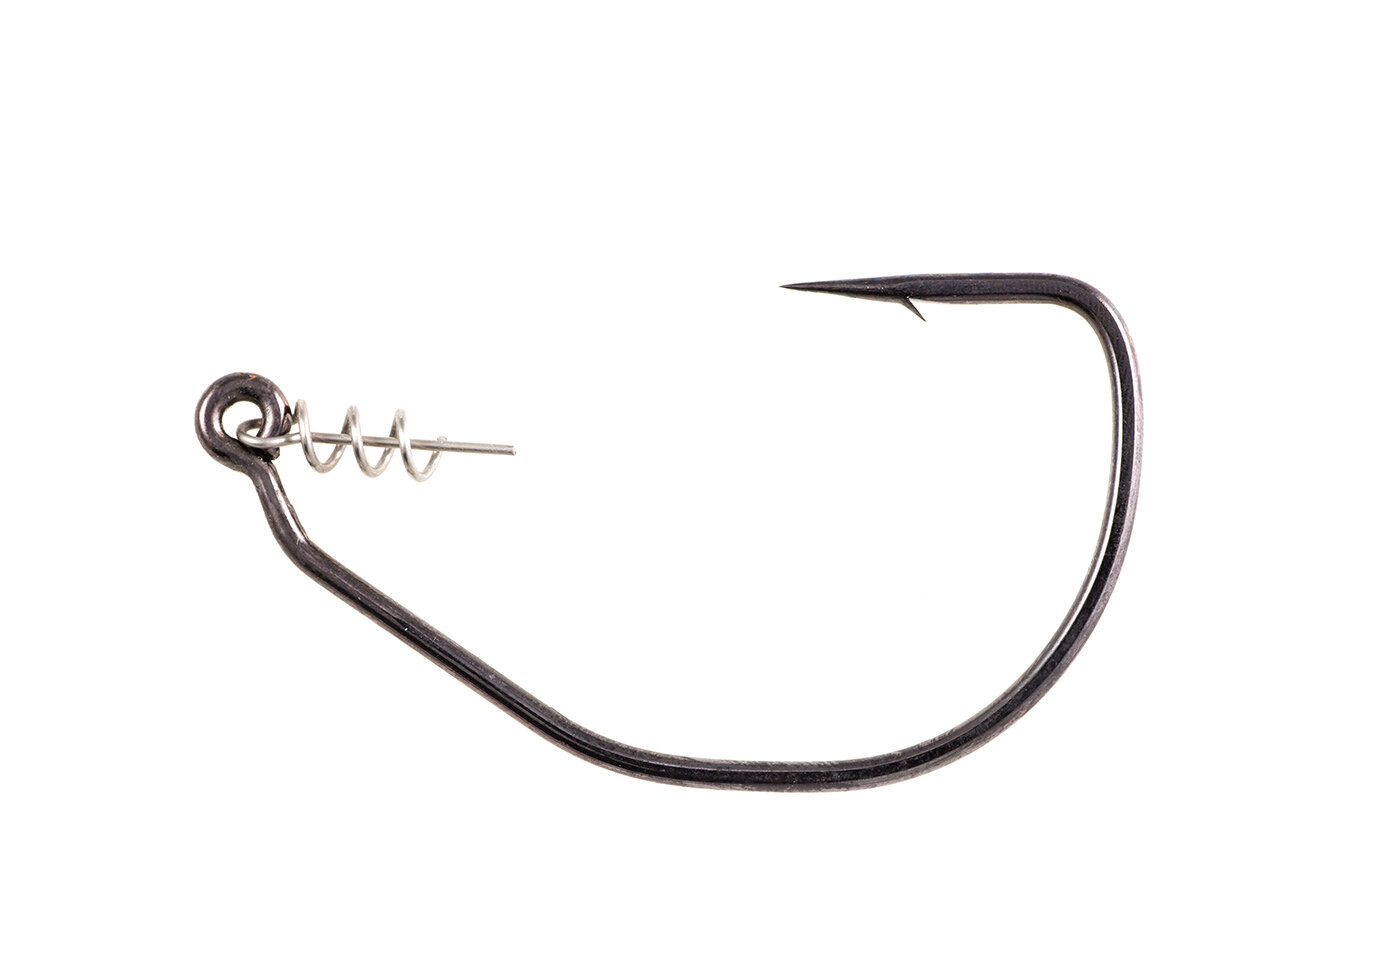 Terminal Tackle — New Surfcasting Gear — The Surfcaster - Trusted